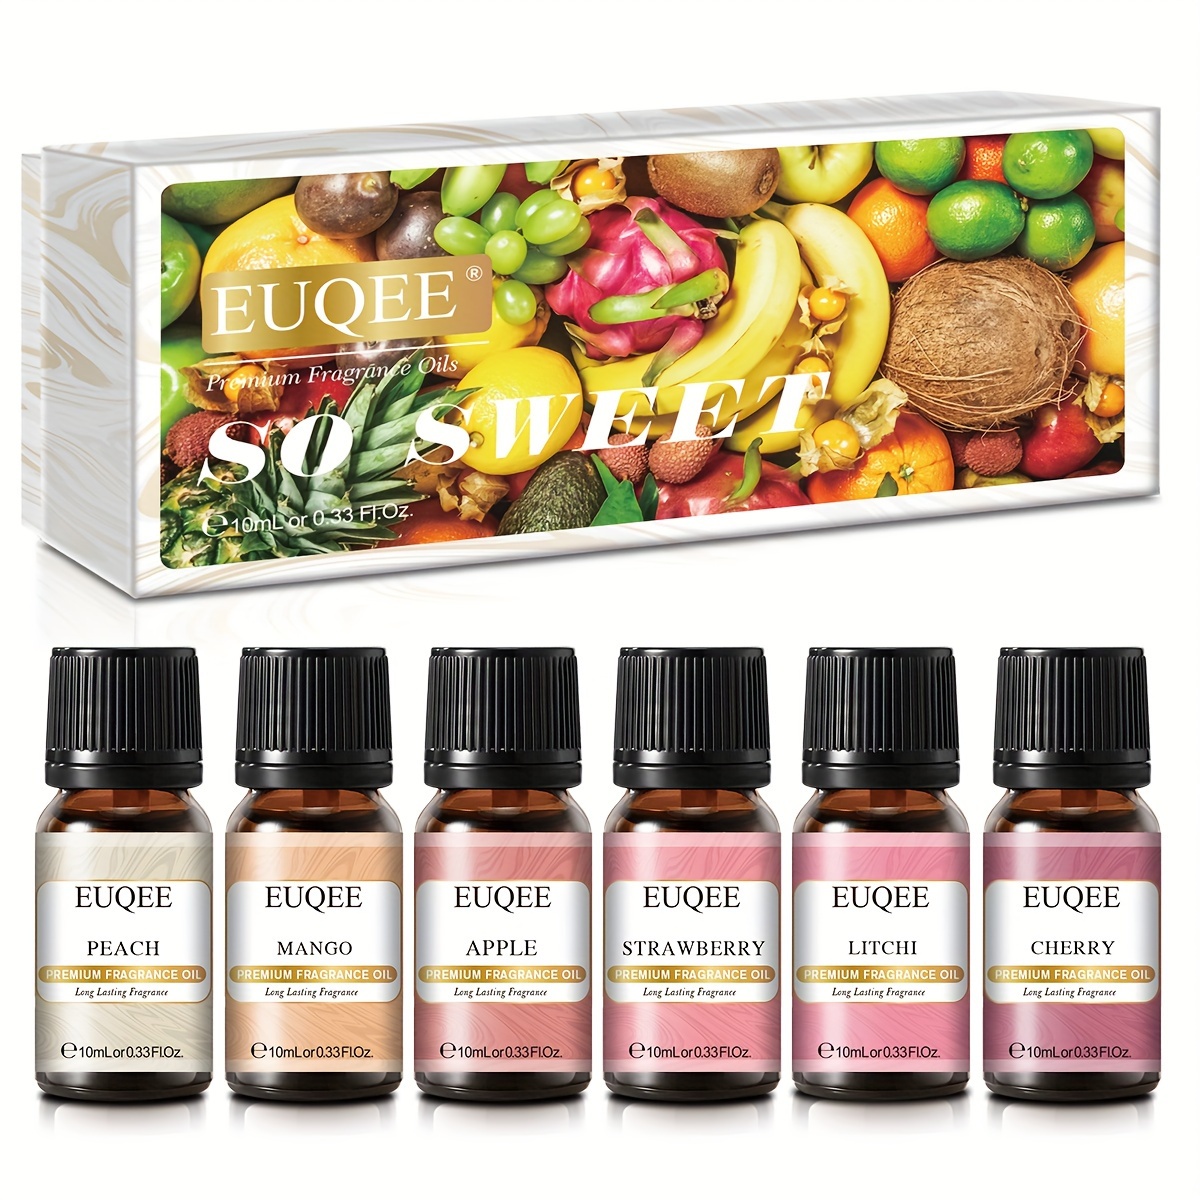 

6pcs 10ml Fragrance Essential Oils Set For Diffusers, Humidifiers, Soap Making -strawberry, Cherry, , , Mango, Peach